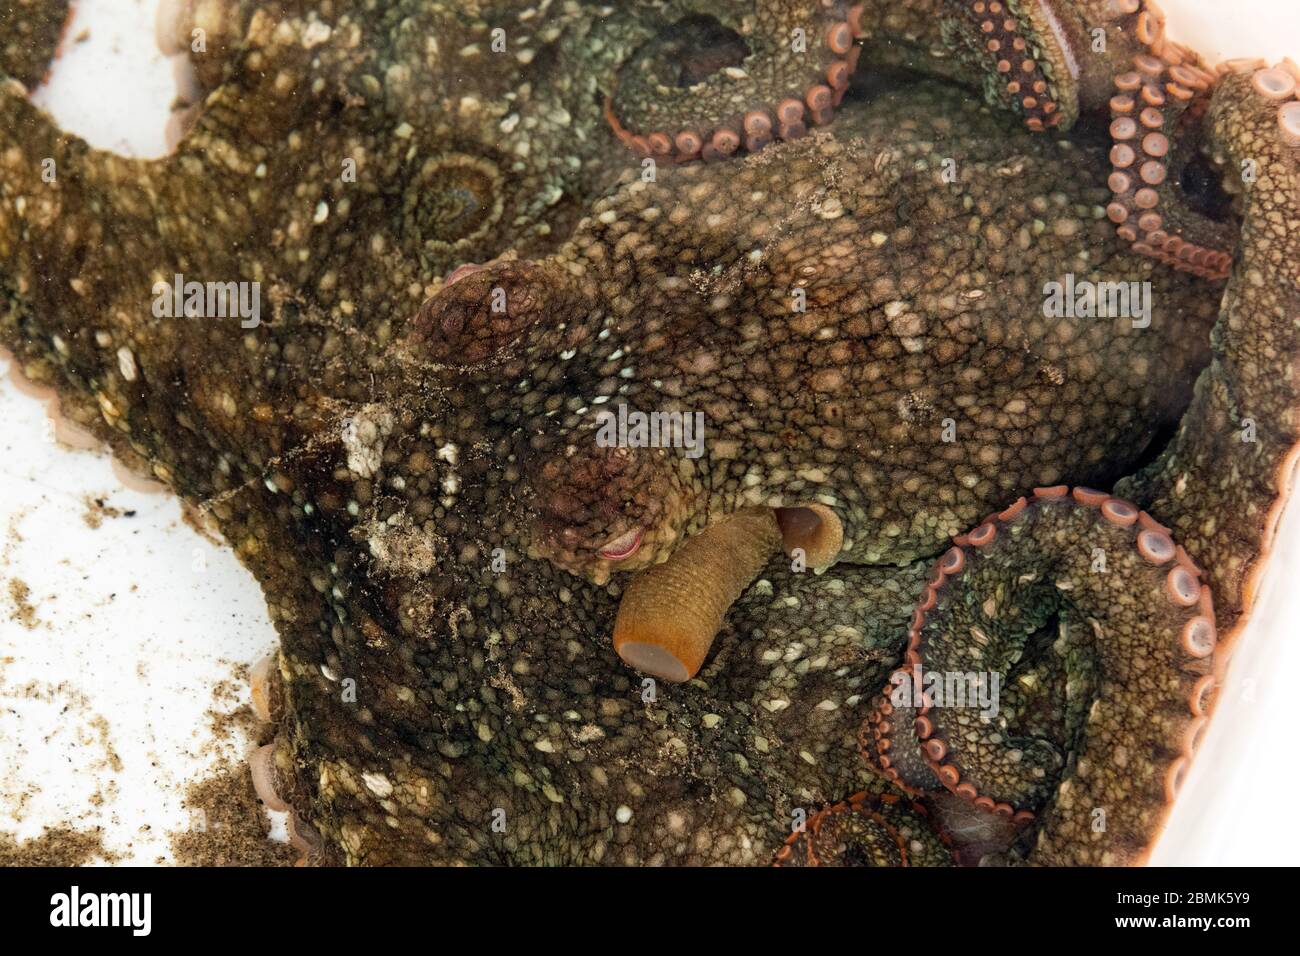 Close up of a California two-spot octopus (Octopus bimaculoides), showing the eye and siphon. Leo Carrillo State Park, Malibu, California Stock Photo